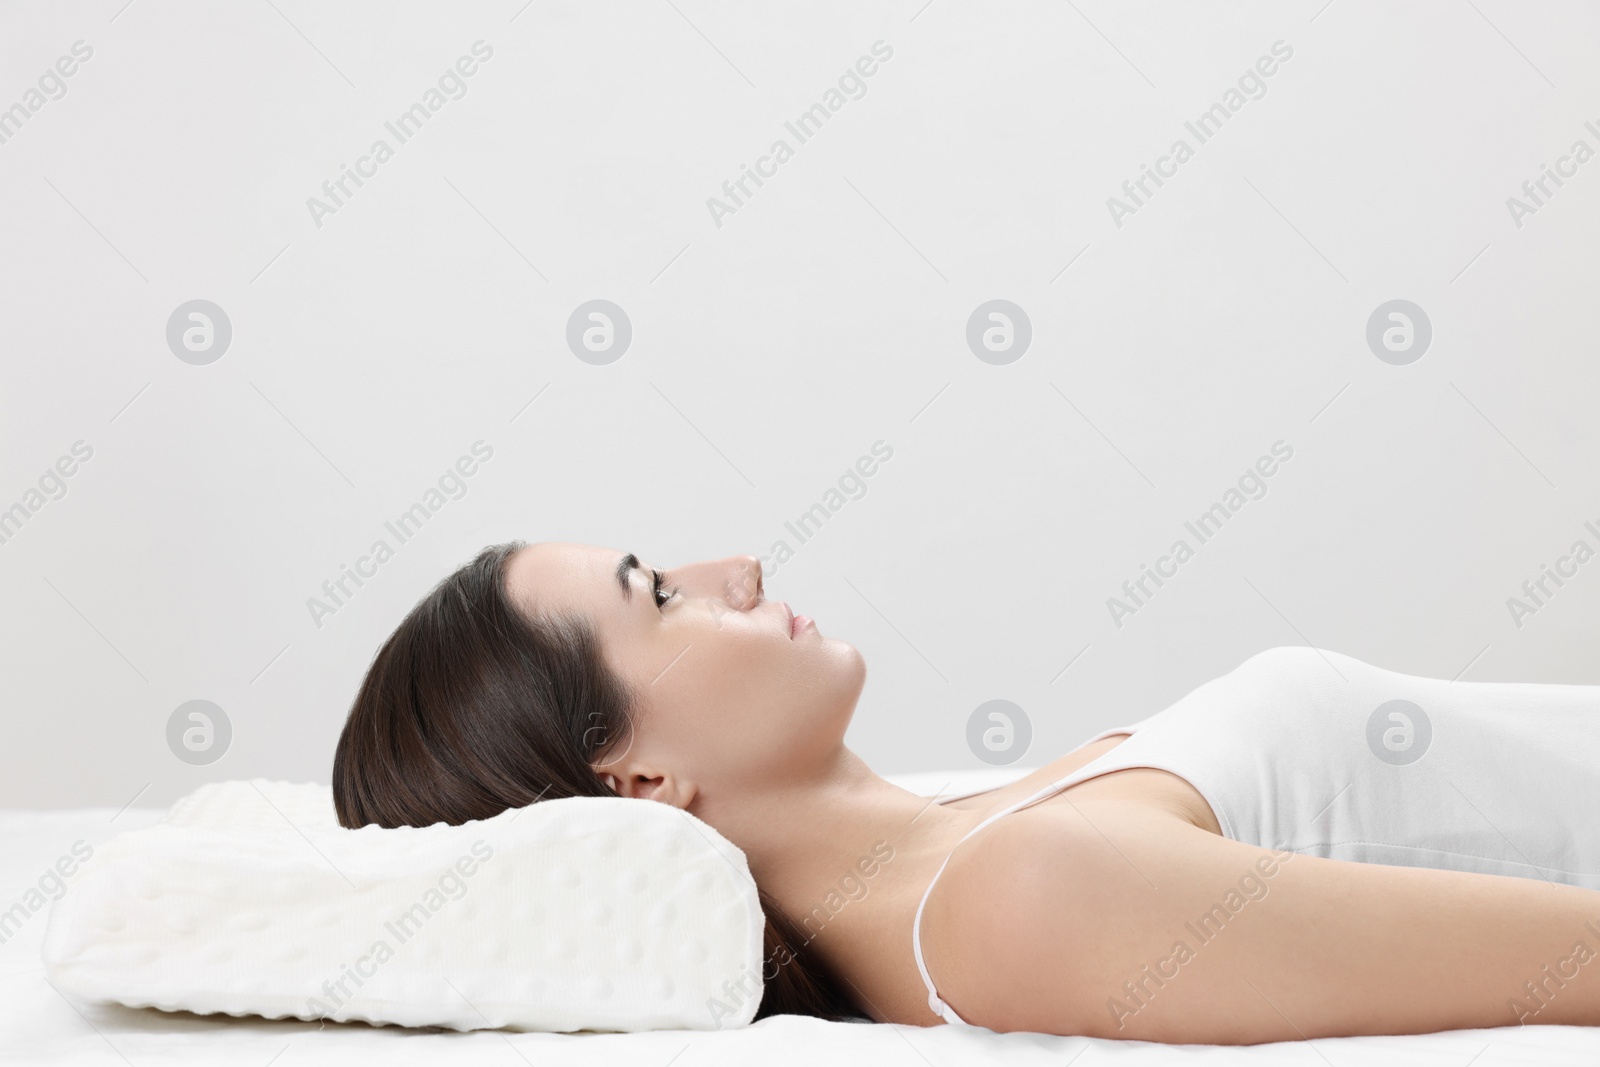 Photo of Woman lying on orthopedic pillow against light grey background, space for text